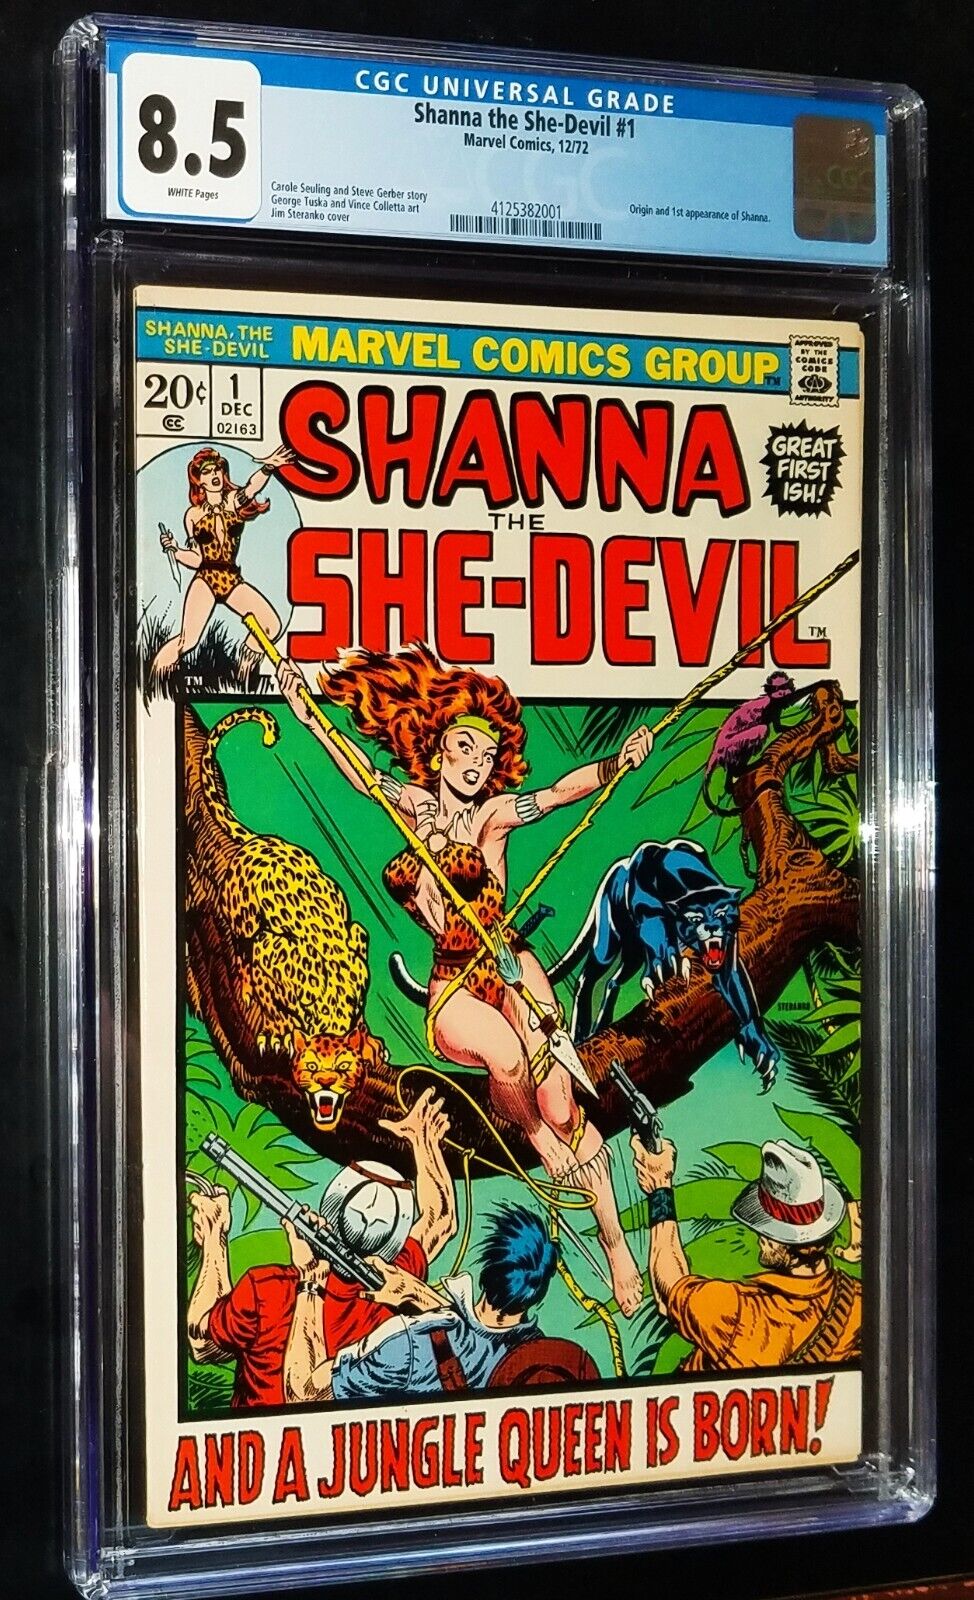 CGC SHANNA THE SHE-DEVIL #1 1972 Marvel Comics CGC 8.5 VF+ WHITE PAGES KEY ISSUE